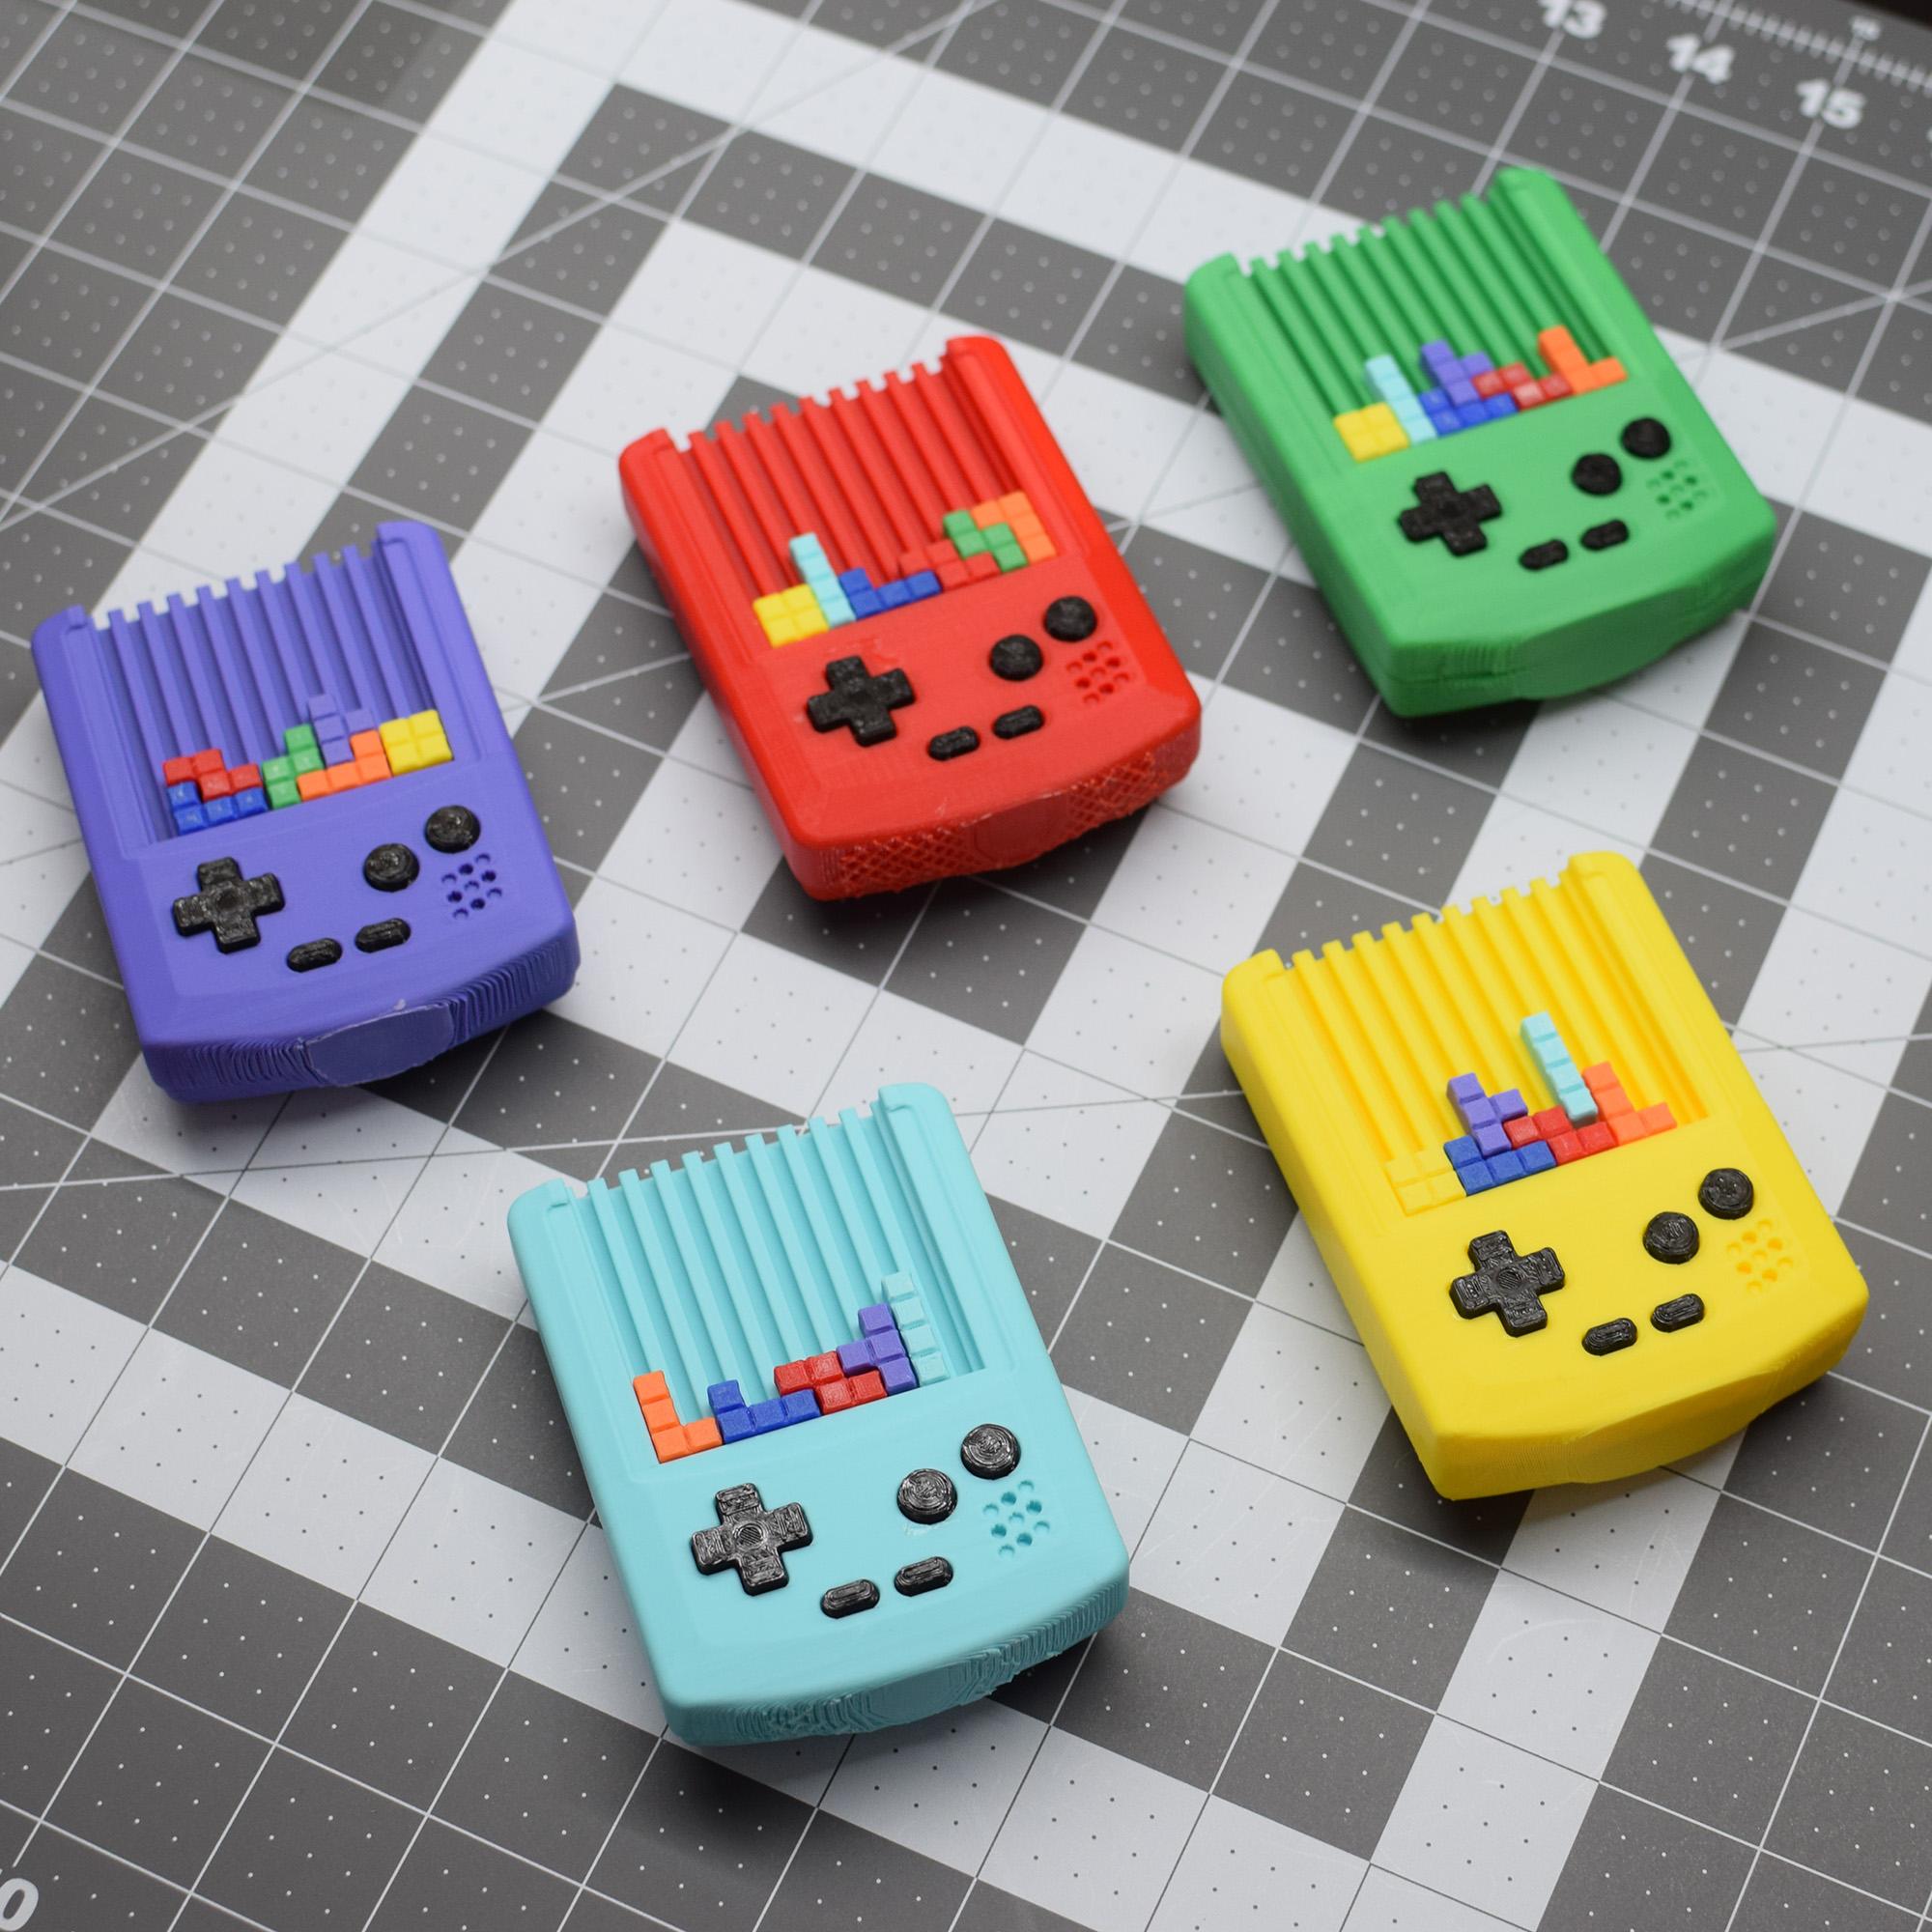 MINI TETRIS GAMEBOY COLOR - RETRO TOY AND CONTAINER 3d model